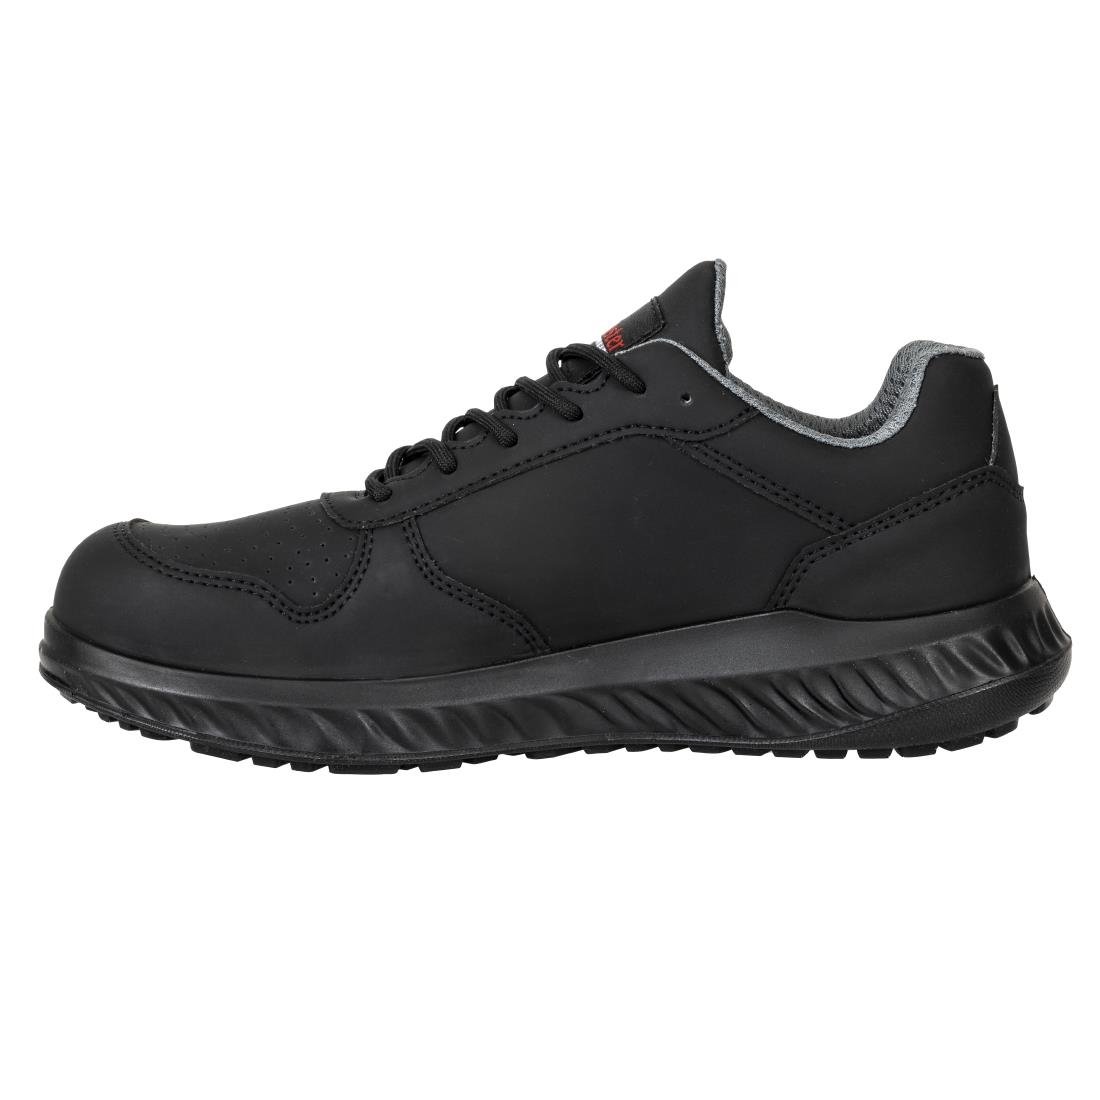 BA063-46 Slipbuster Recycled Microfibre Trainers Matte Black 46 JD Catering Equipment Solutions Ltd